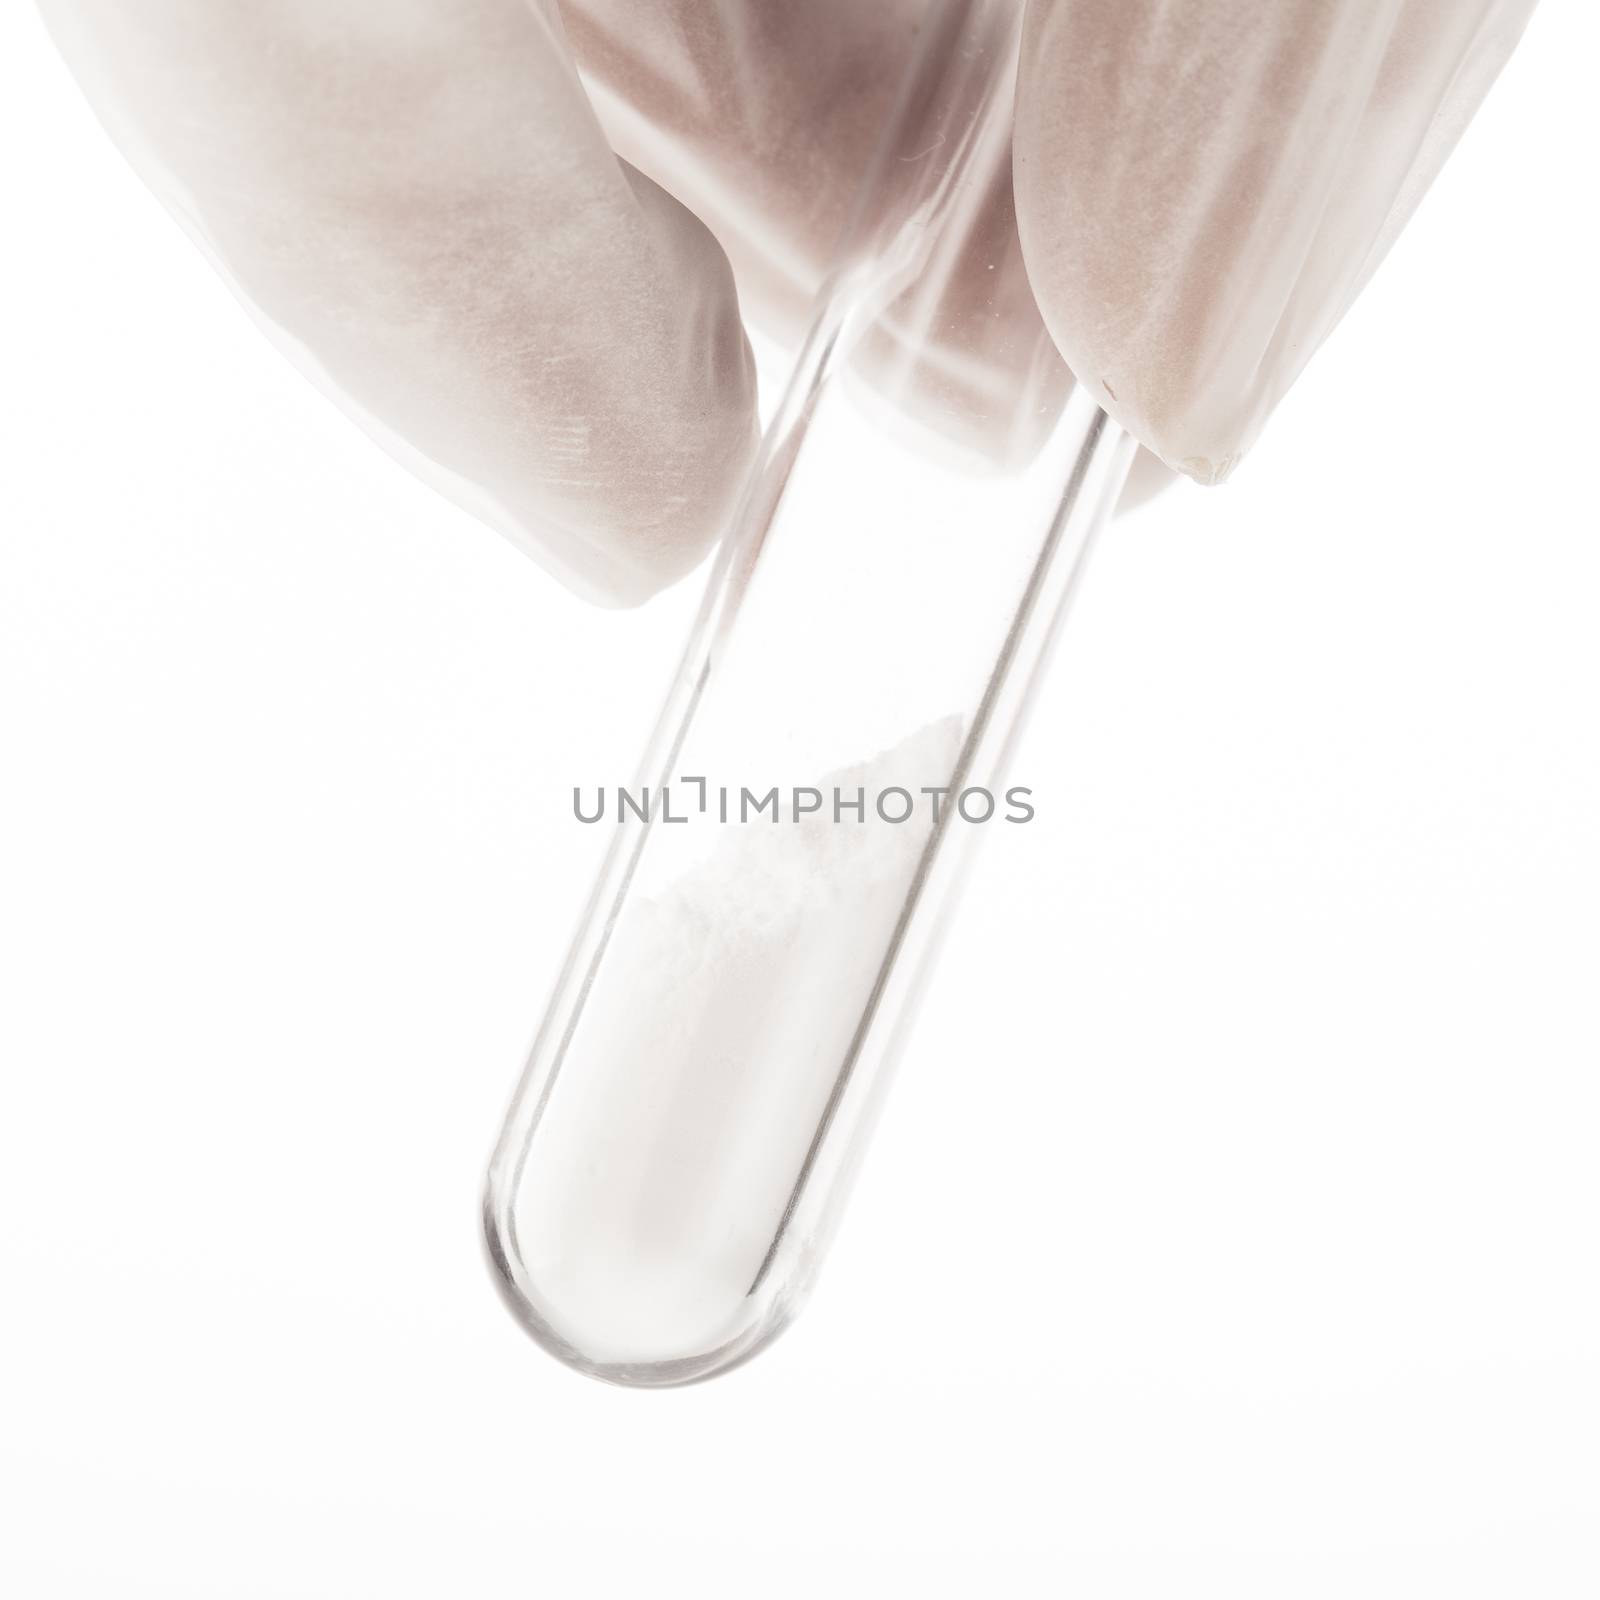 Close up of white powder in test tube being held by fingers